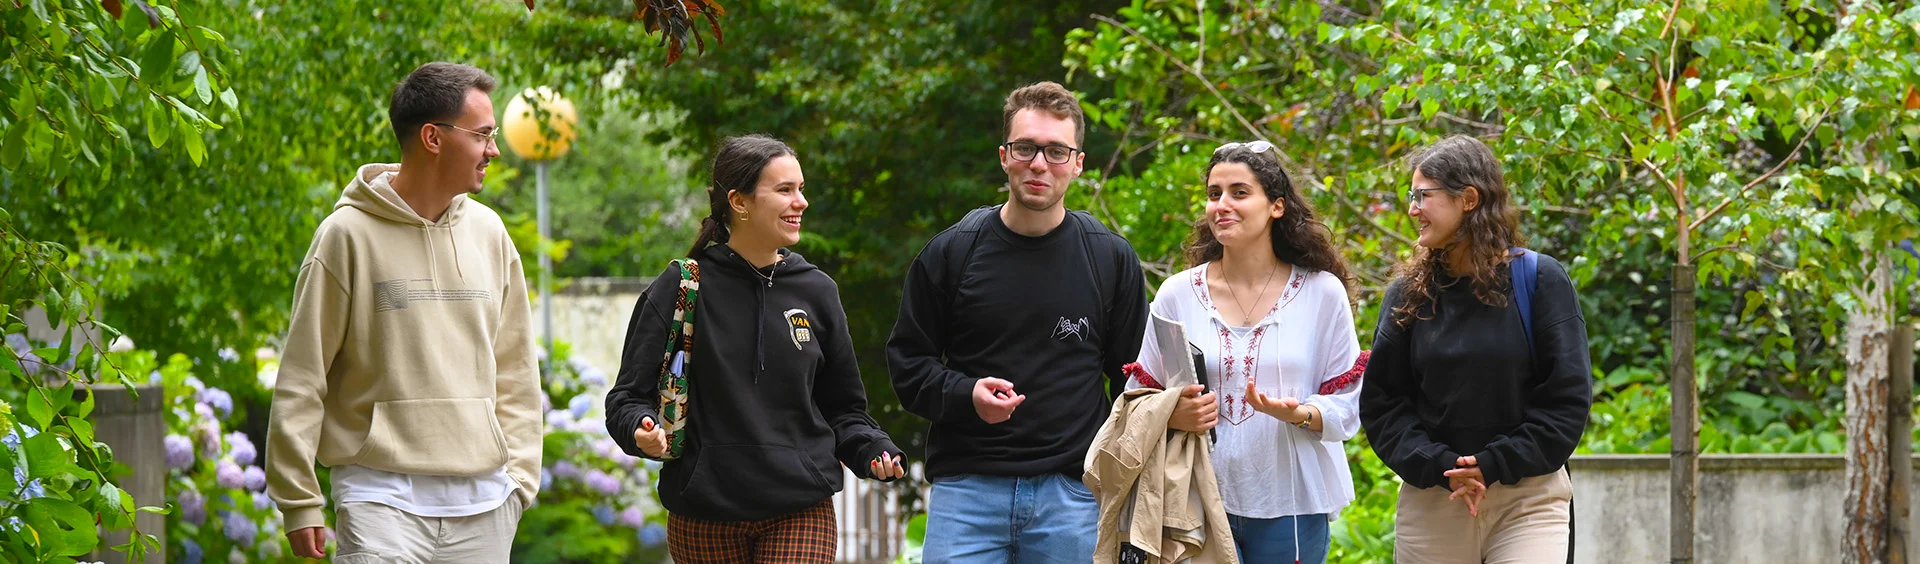 group of students walking happily on the campus of the Faculty of Sciences of the University of Porto